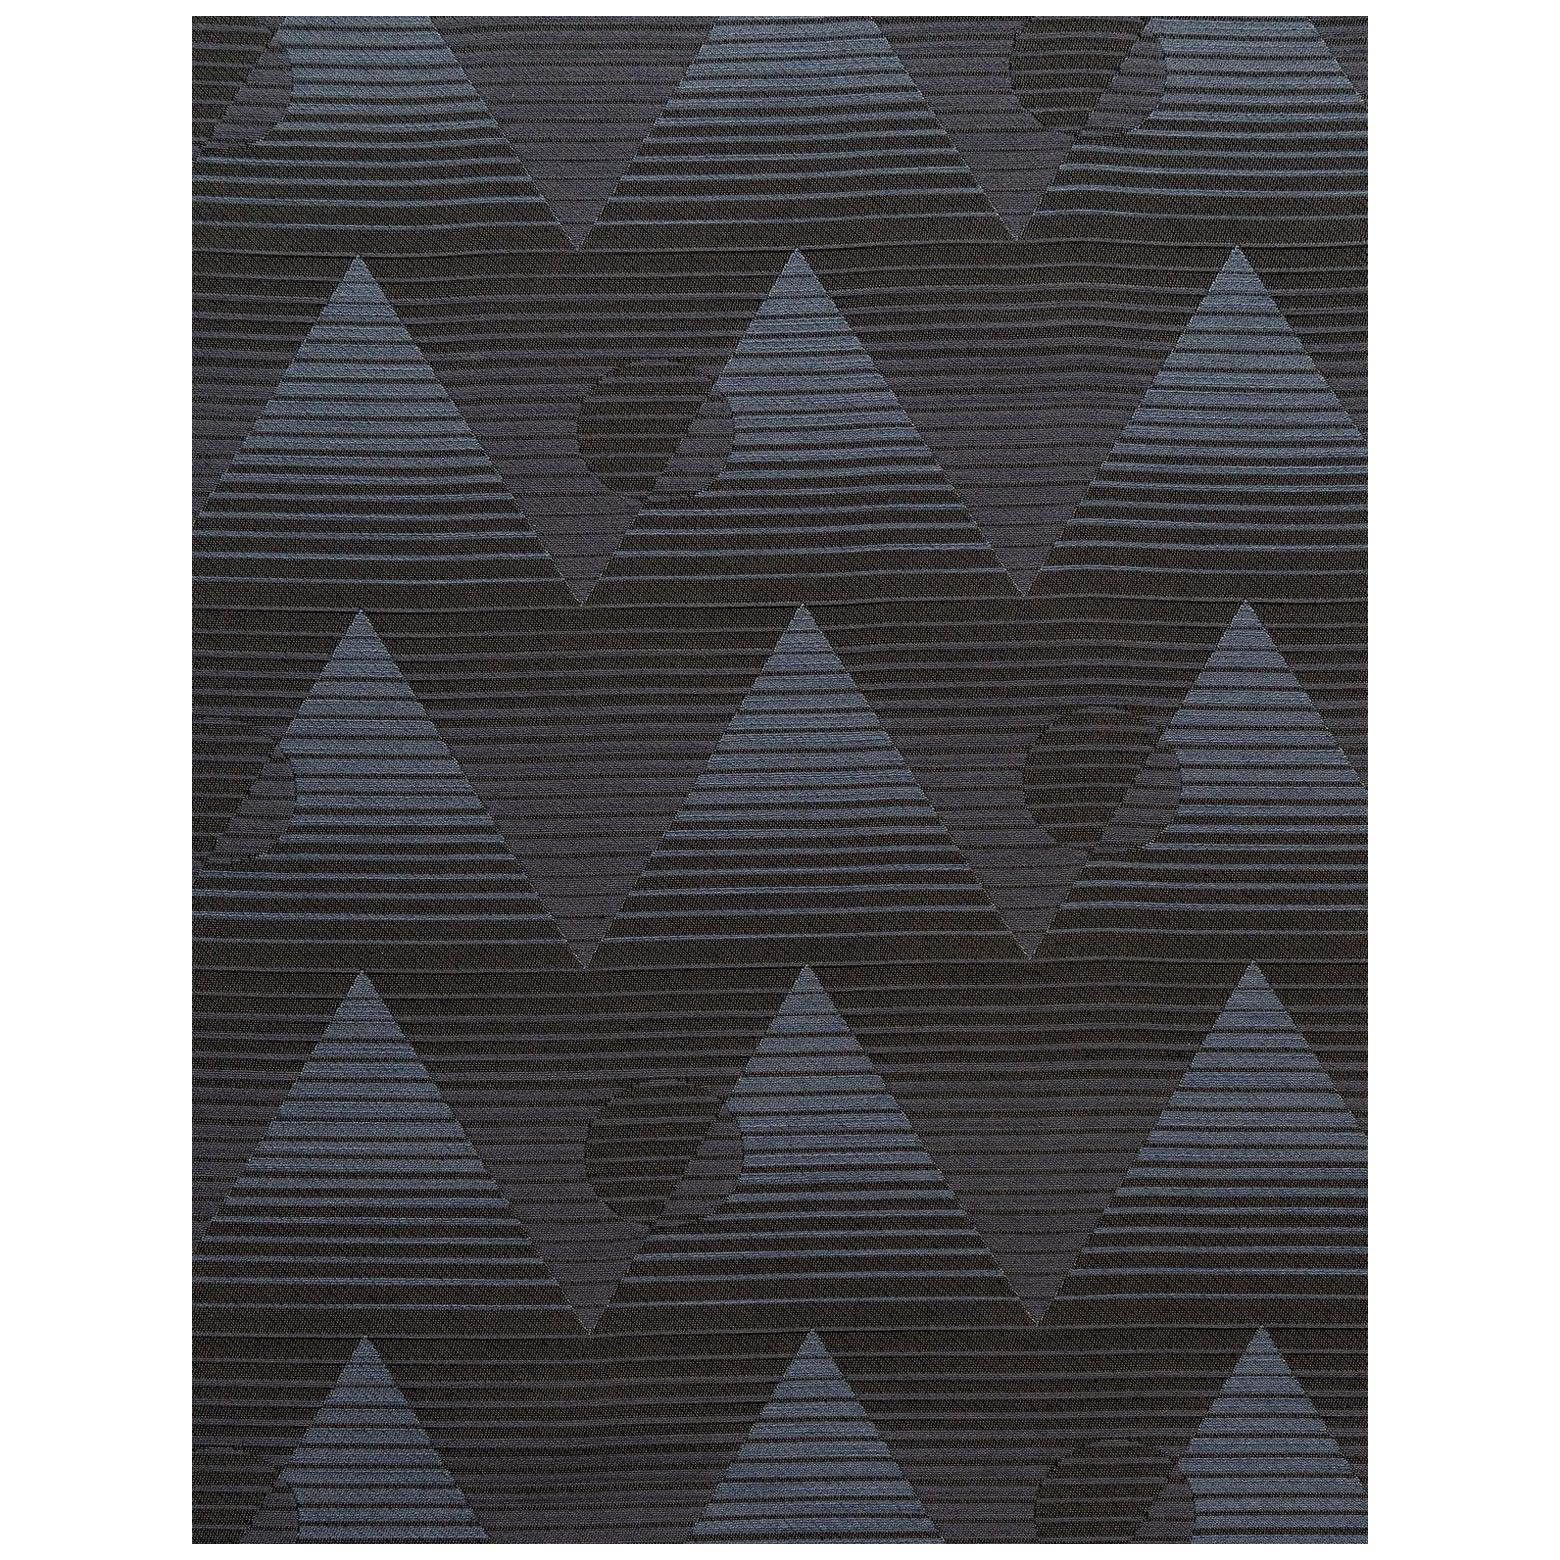 Pyramide du Soleil Woven Commercial Grade Fabric in Dorado, Black and Navy For Sale